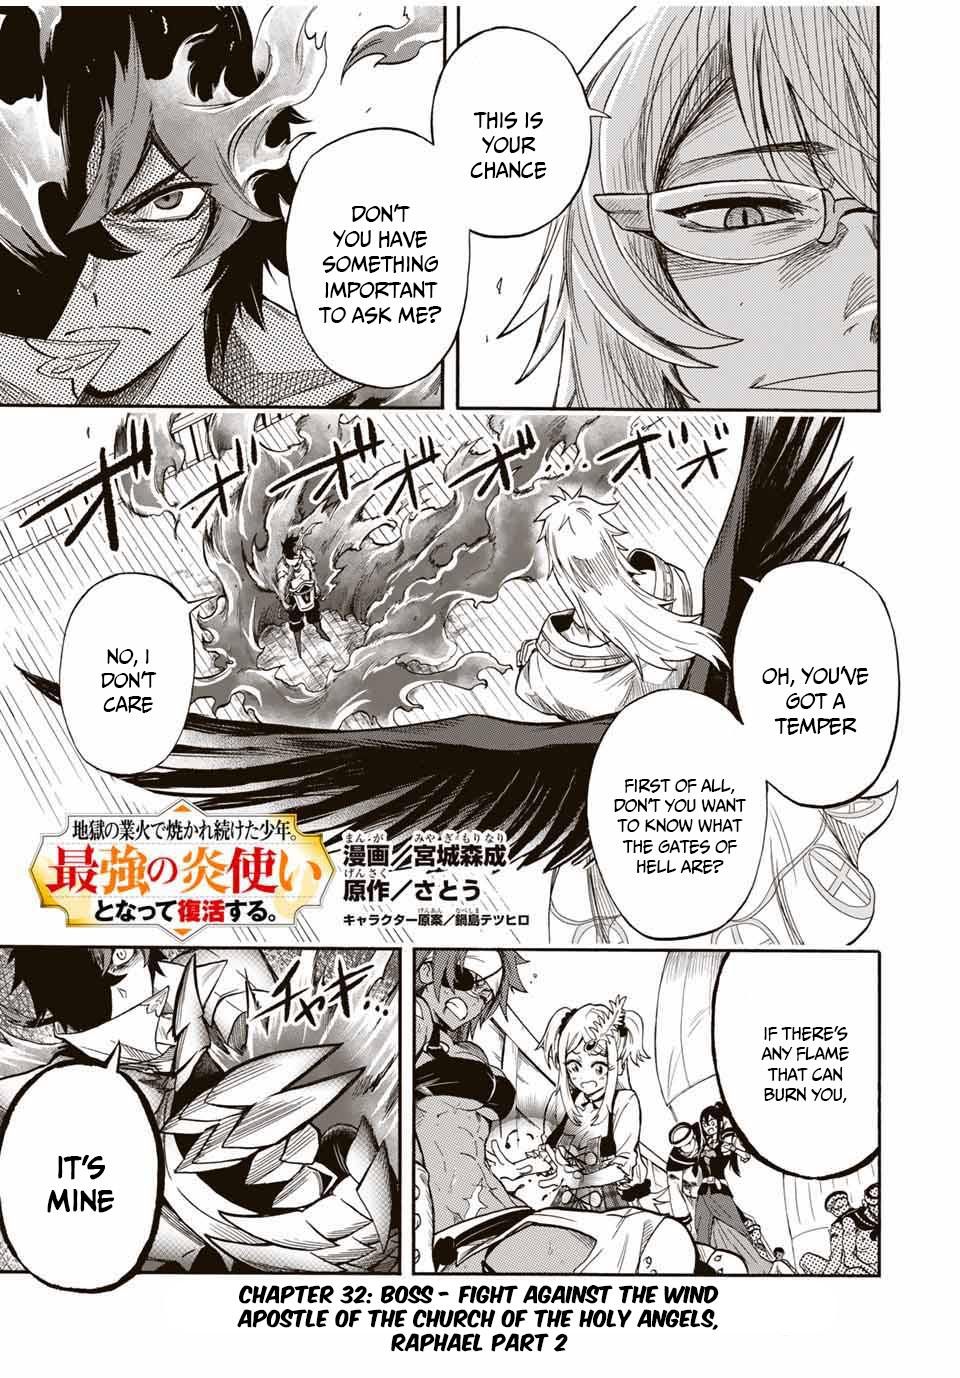 The Boy Who Had Been Continuously Burned By The Fires Of Hell. Revived, He Becomes The Strongest Flame User. - Page 1